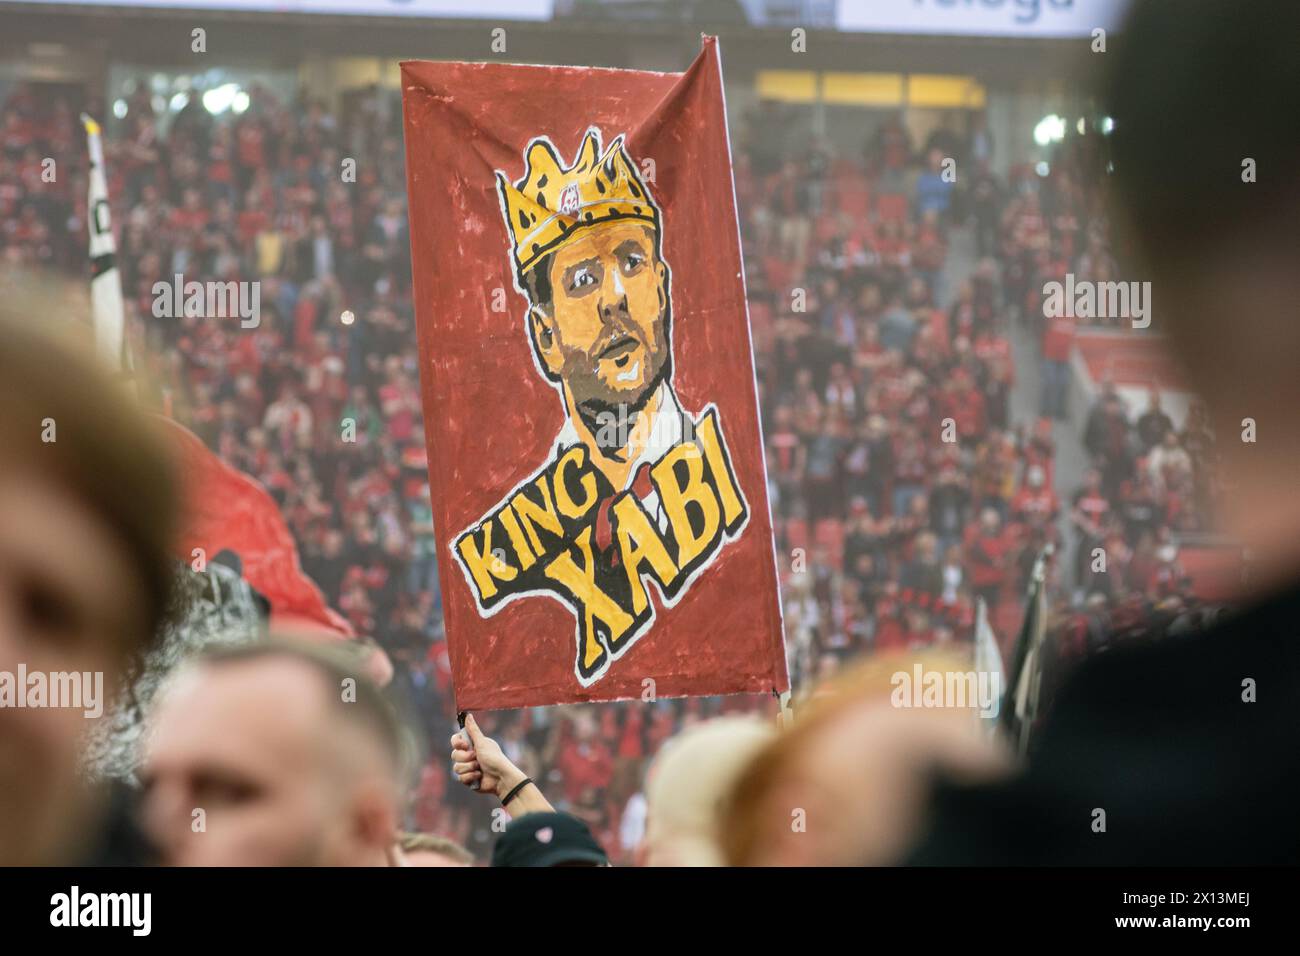 Leverkusen, North Rhine-Westphalia, Germany. 14th Apr, 2024. A Bayer Leverkusen fan holds up a sign reading ''King Xabi'', referring to head coach XABIER ALONSO in the Bundesliga matchday 29 match between Bayer Leverkusen and Werder Bremen in the BayArena in Leverkusen, North Rhine-Westphalia, Germany on April 14, 2024. Credit: ZUMA Press, Inc./Alamy Live News Stock Photo